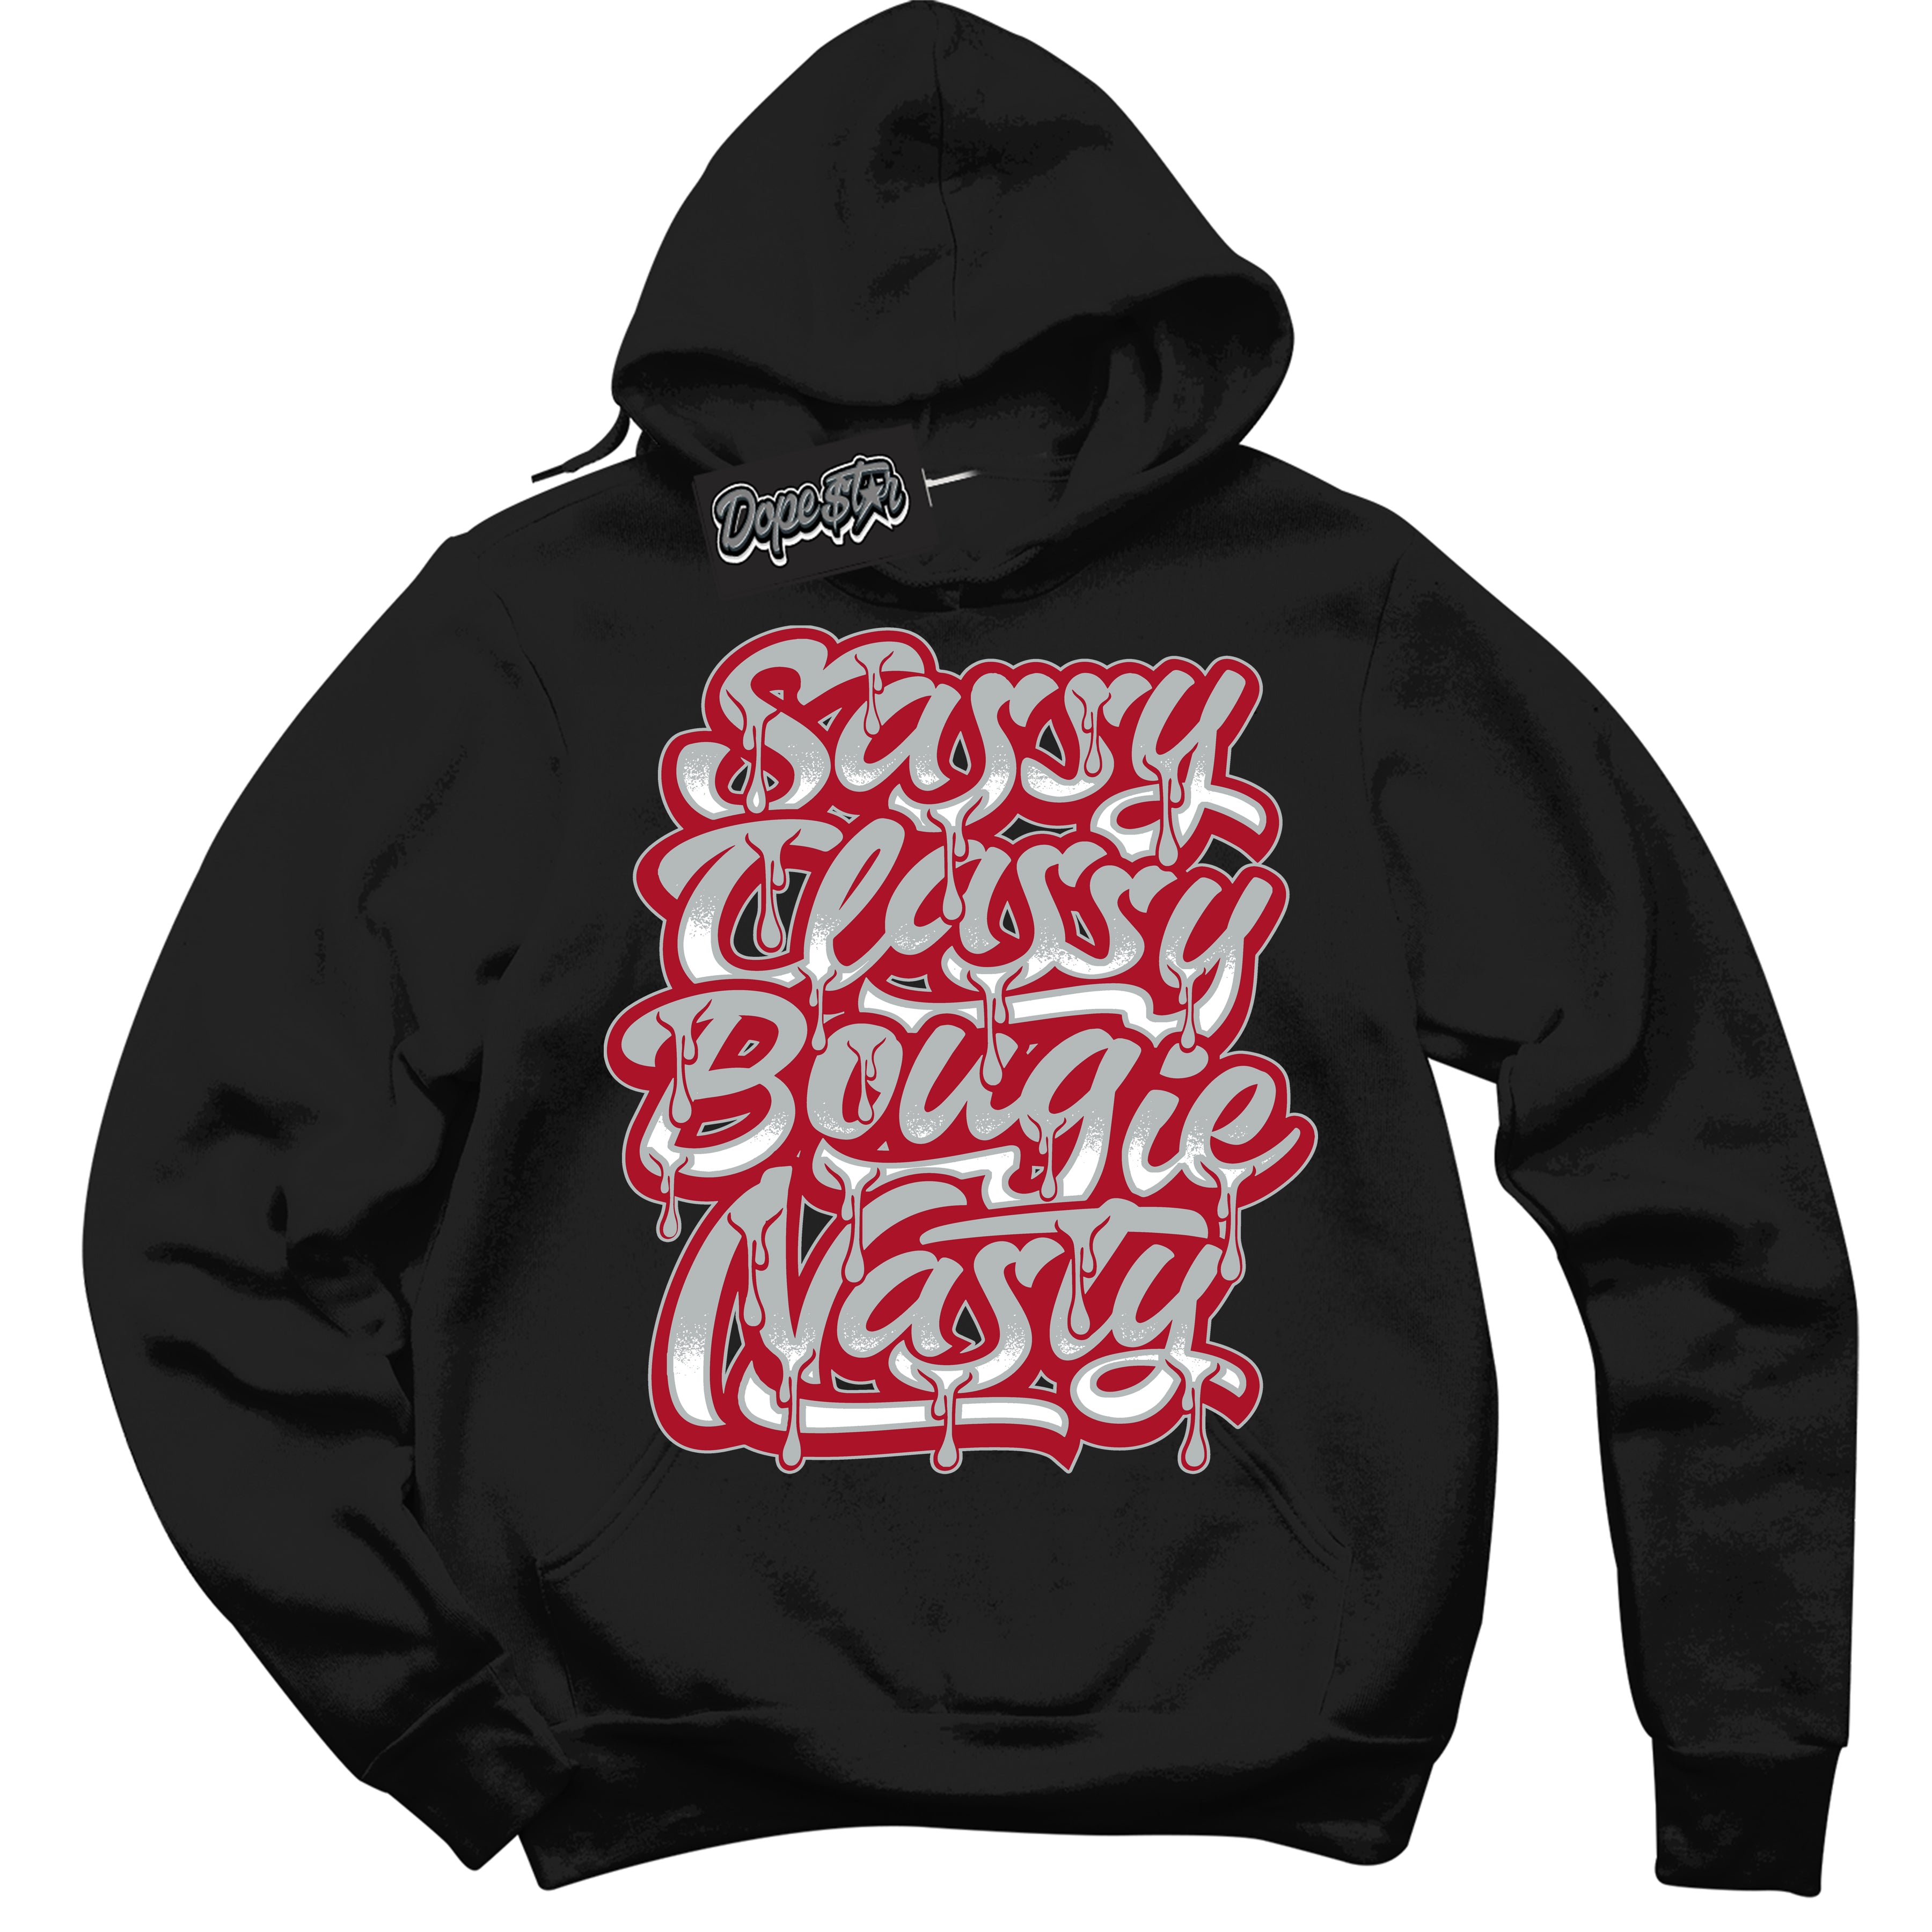 Cool Black Hoodie with “ Sassy Classy ”  design that Perfectly Matches  Reverse Ultraman Sneakers.